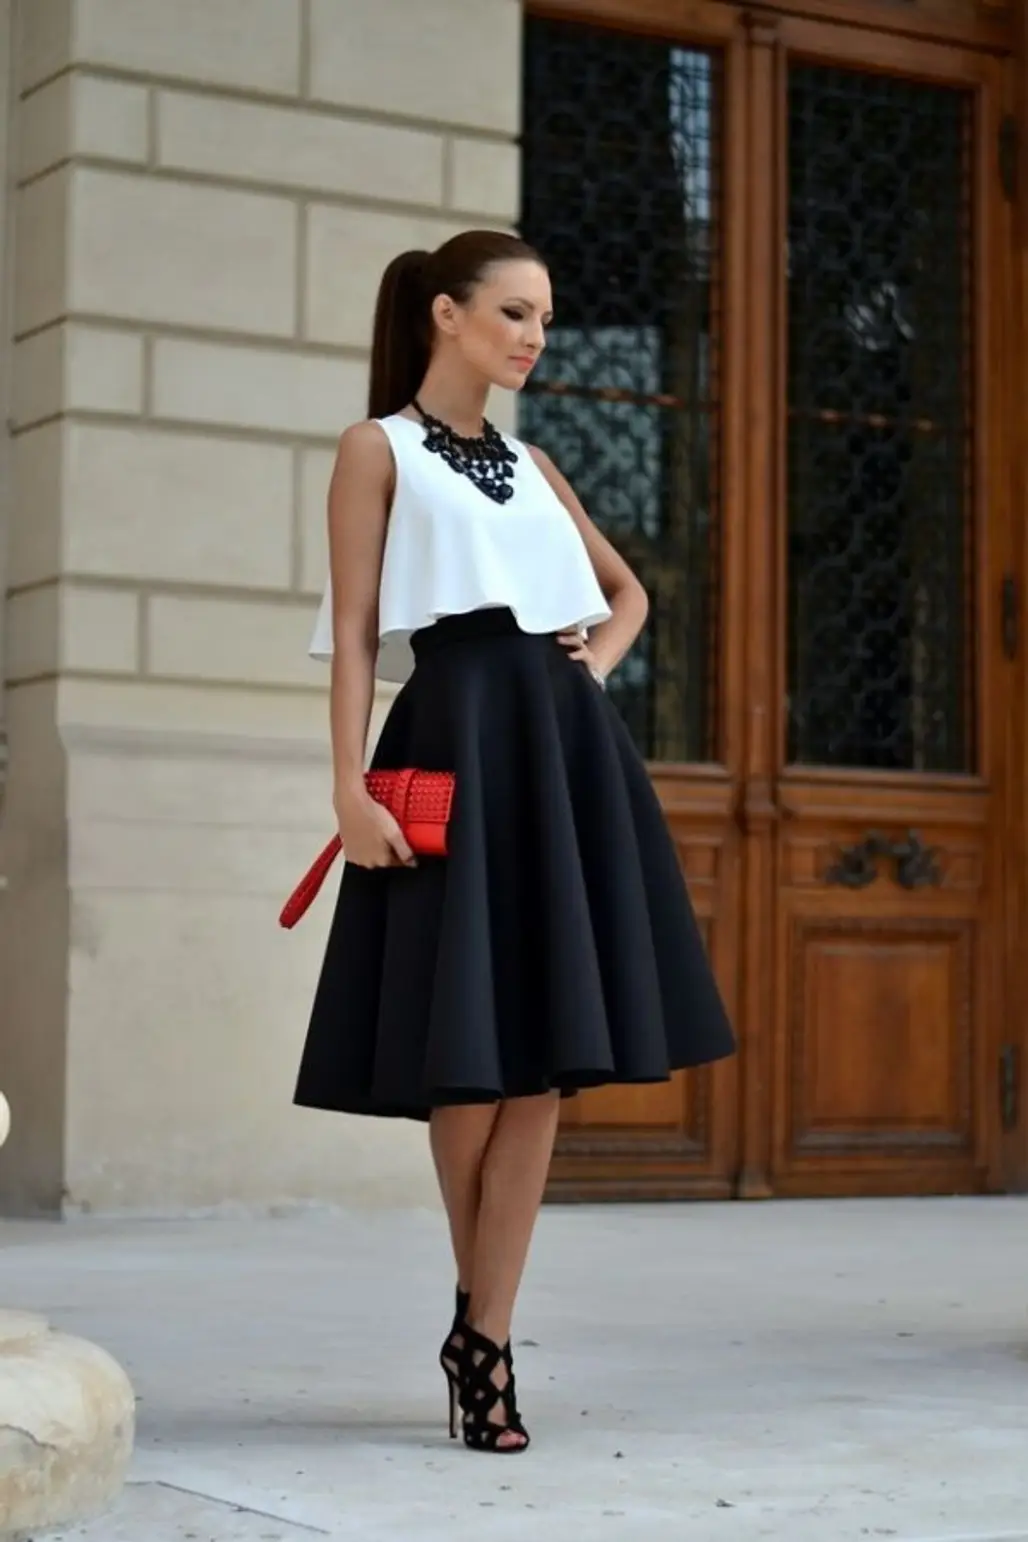 If You're Wearing This Skirt on Date Night, a Statement Piece is a Must. Let Your Bold Clutch or Necklace Be It